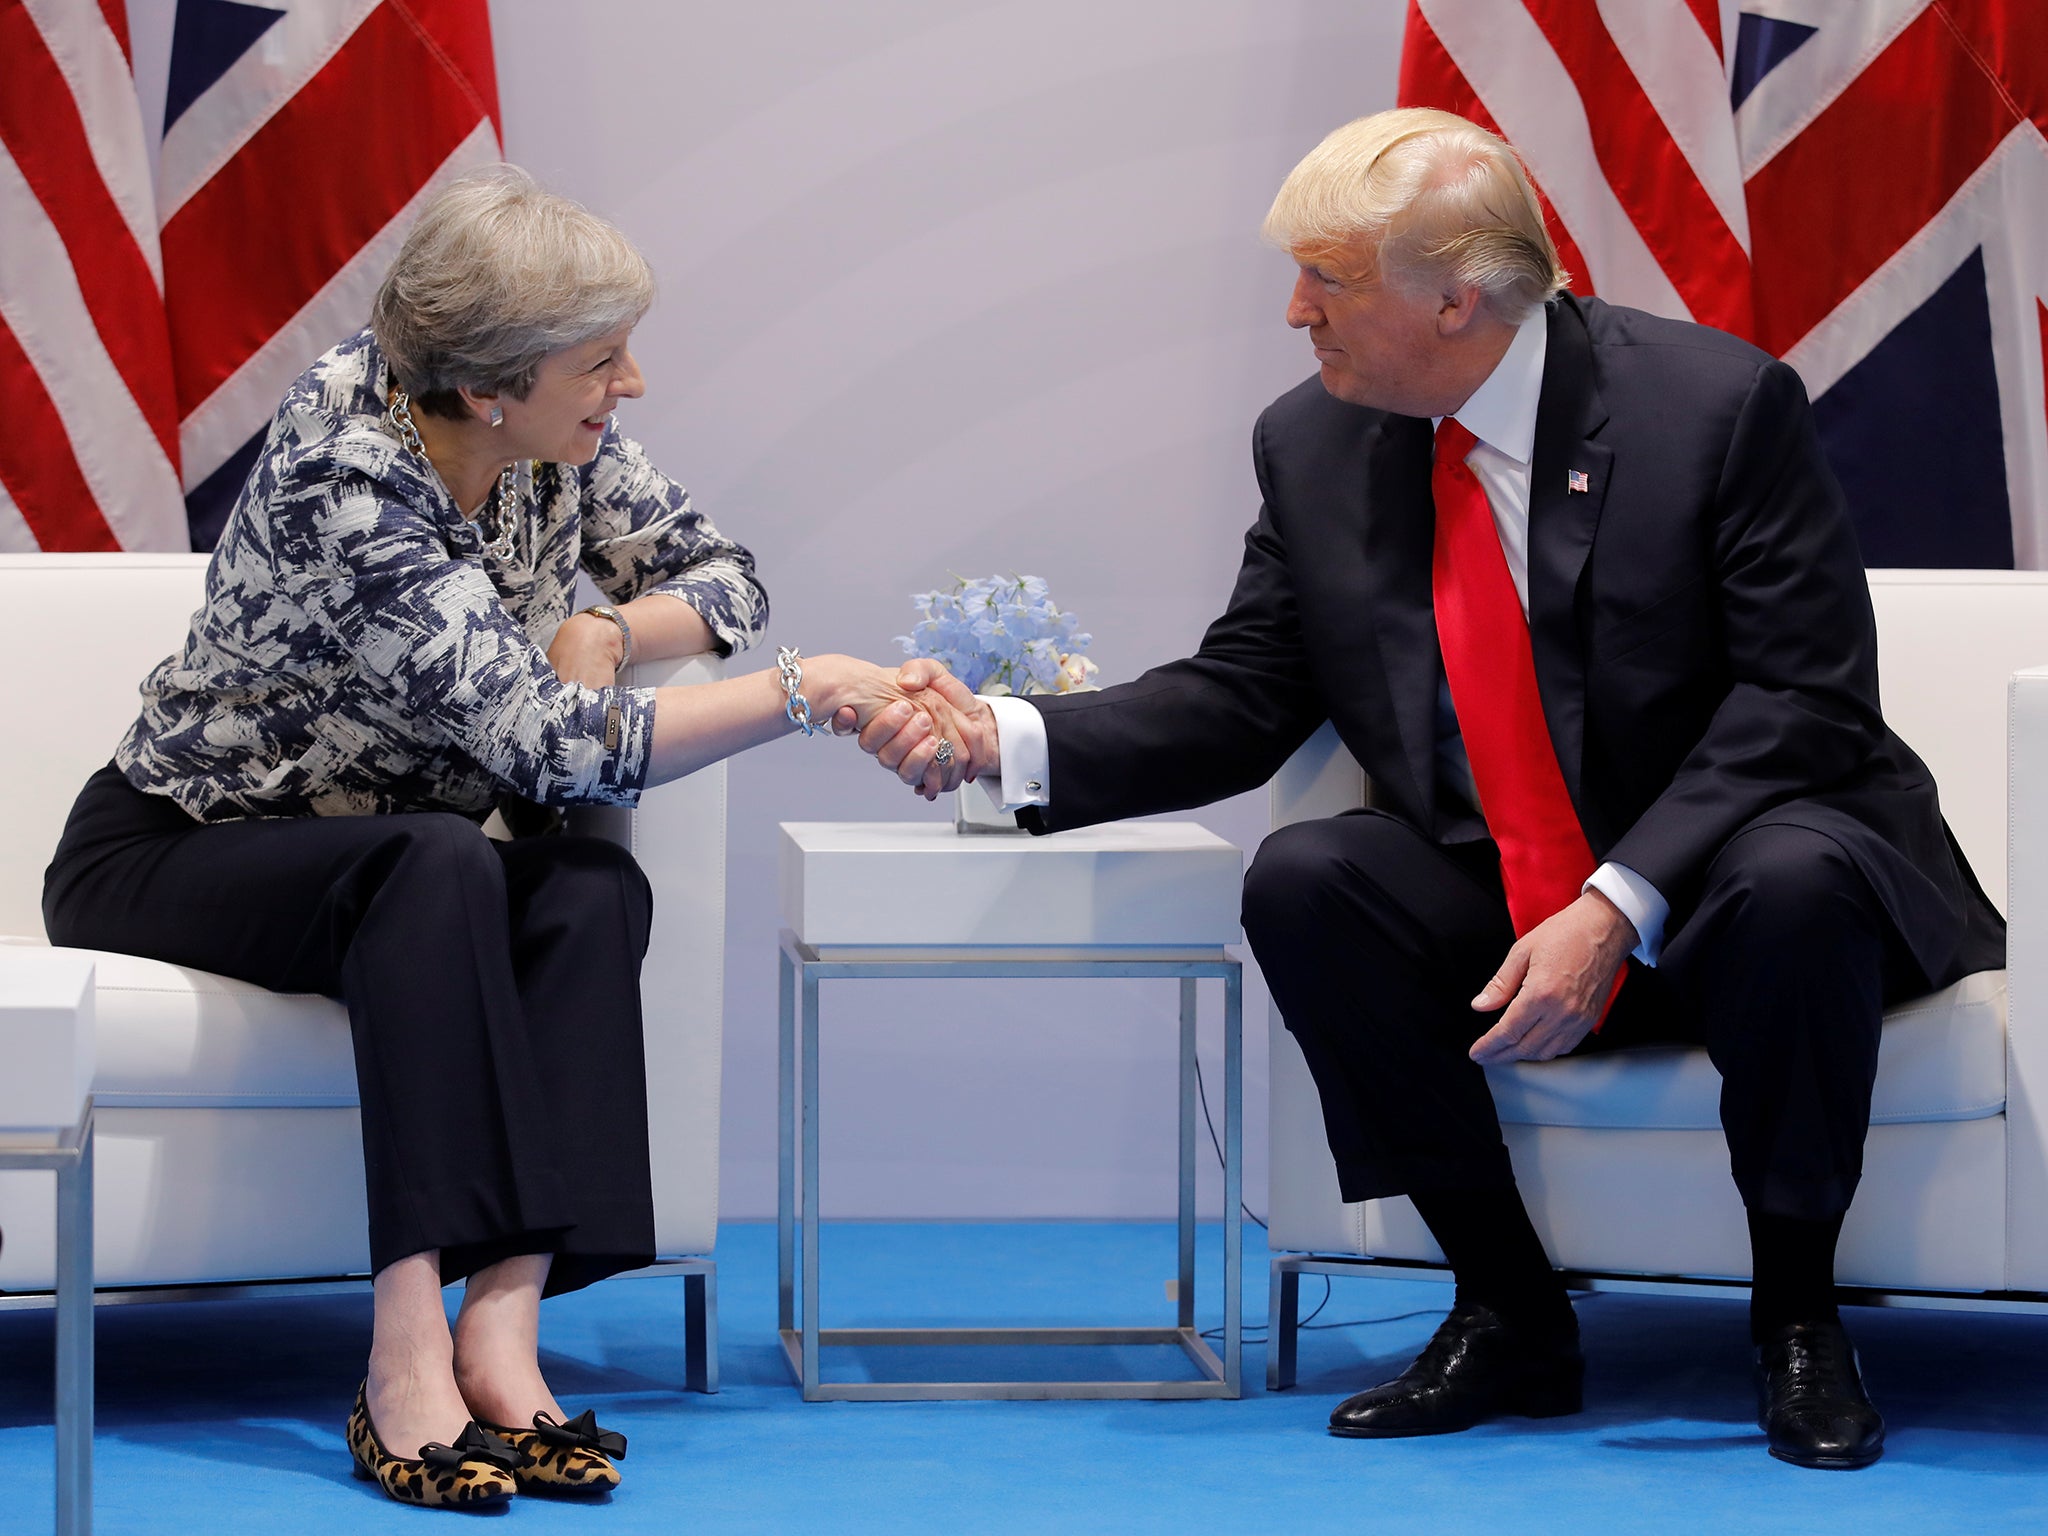 Theresa May talks with Donald Trump during the G20 leaders' summit in Hamburg